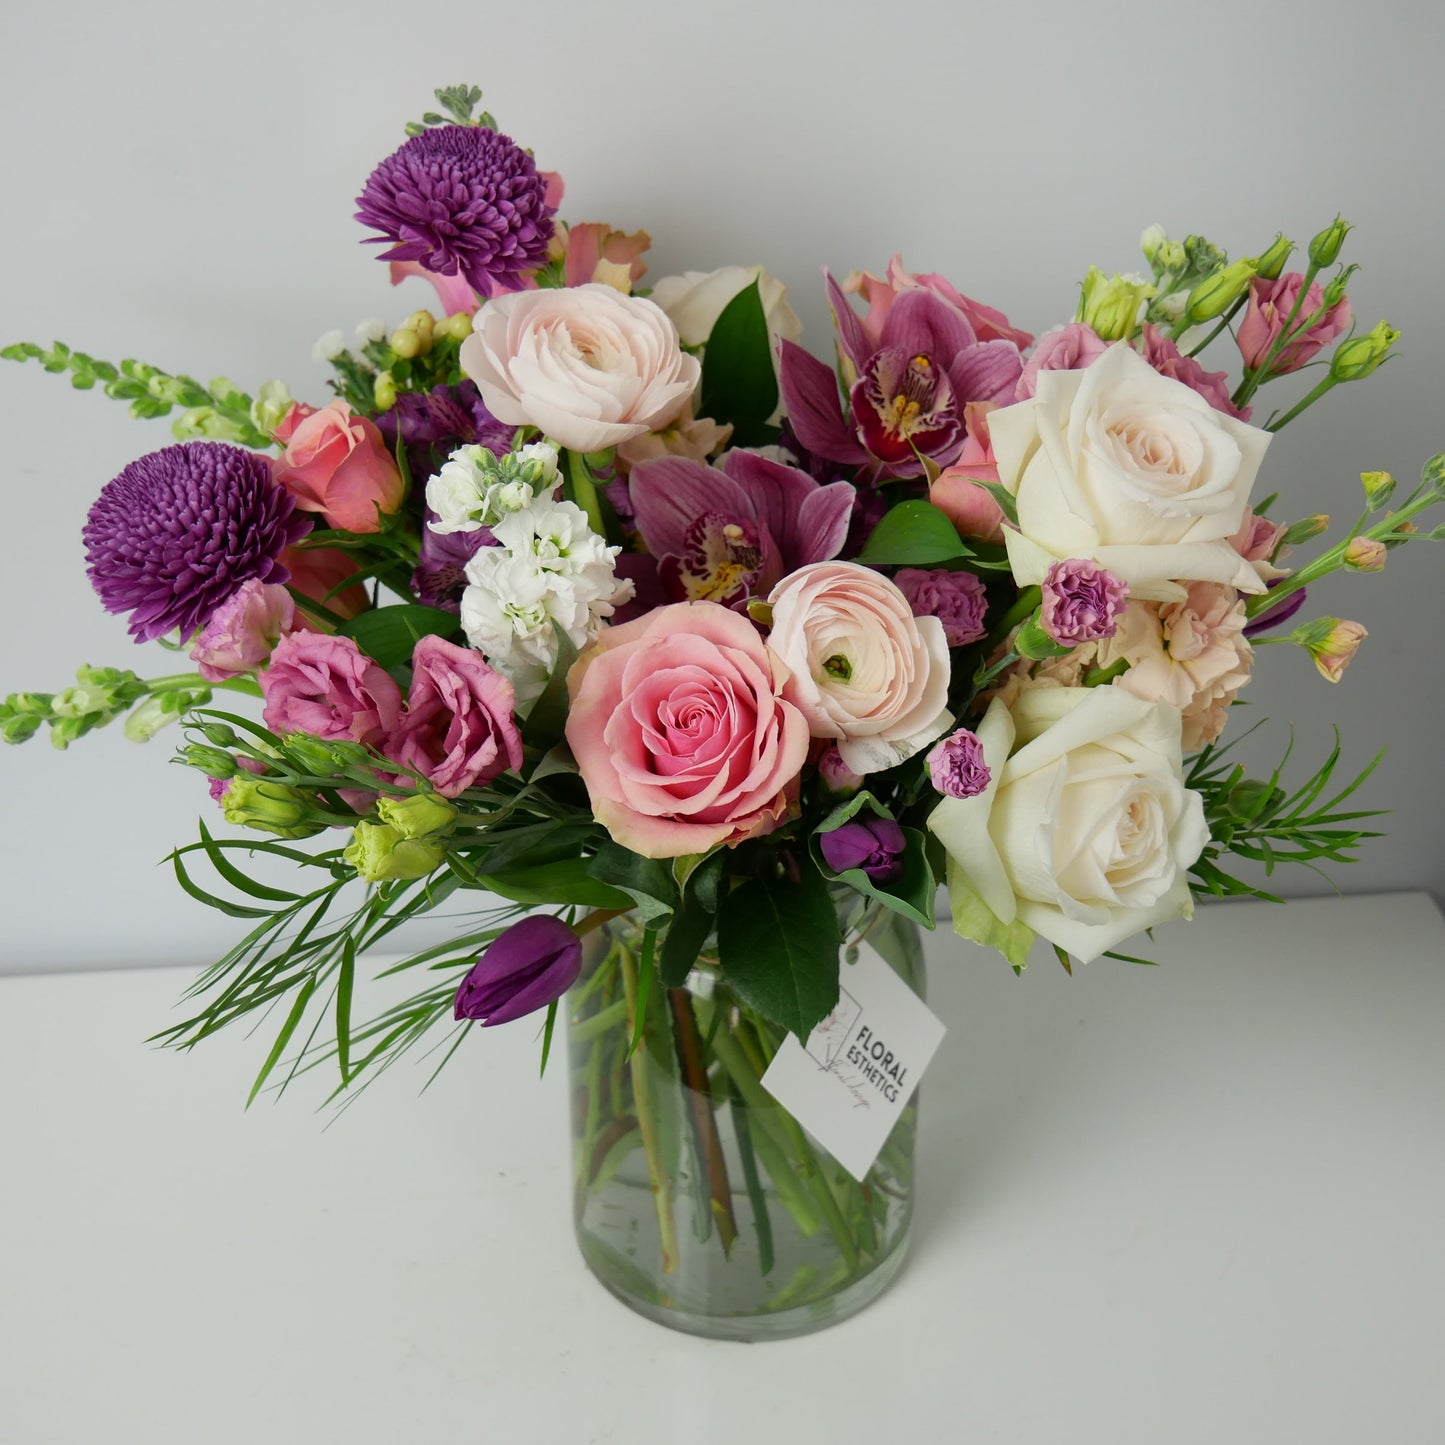 Purple, white and pink premium size flower arrangement featuring orchids, ranunculus, roses, chrysanthemum and much more